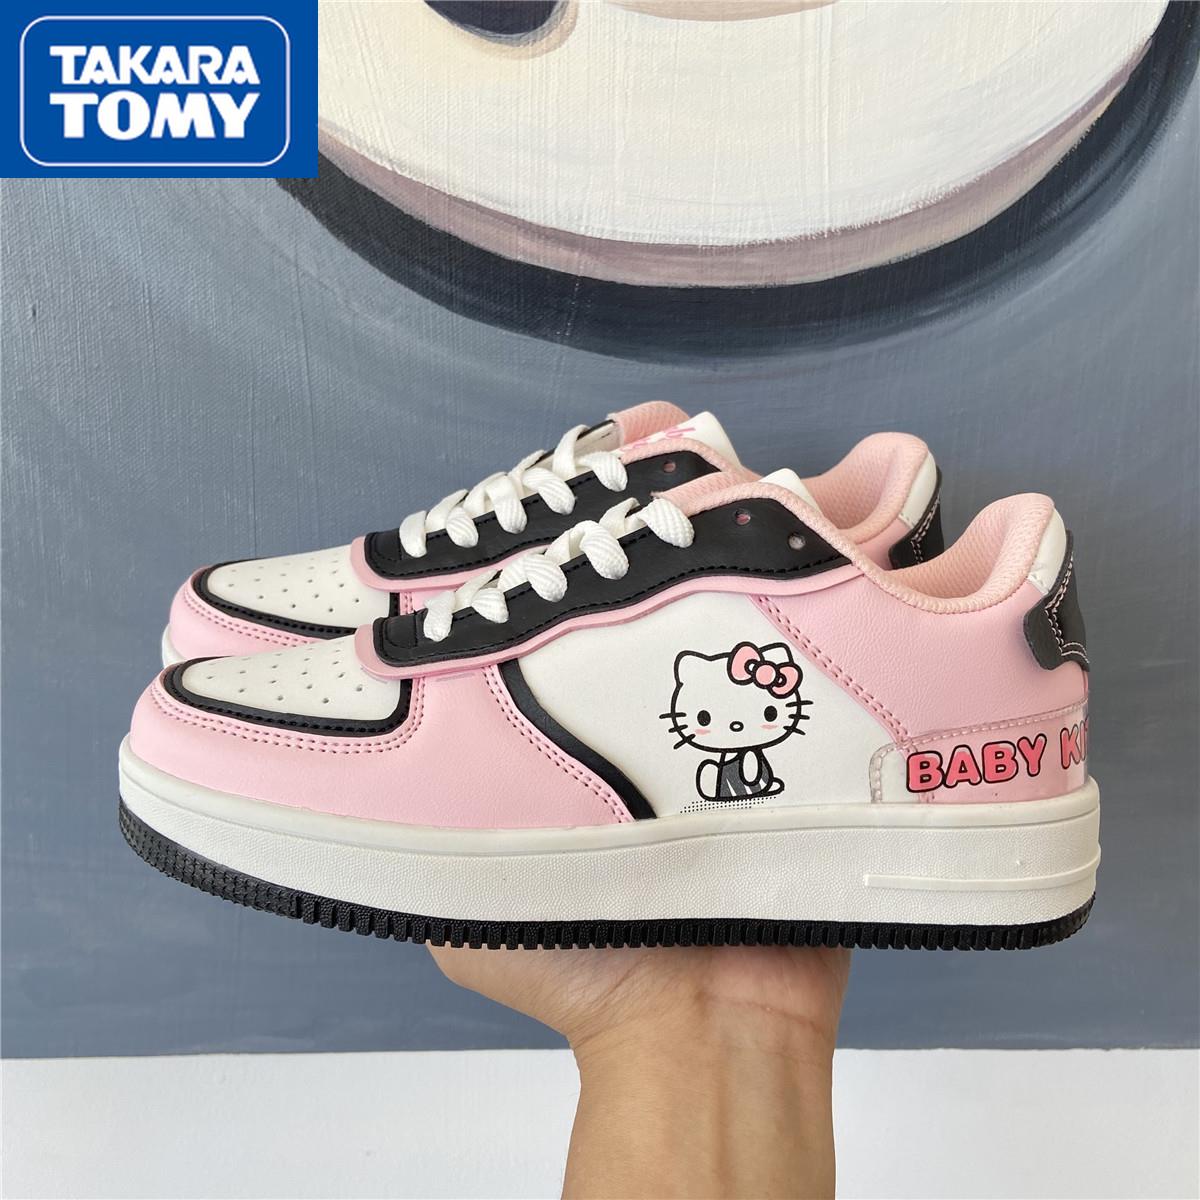 TAKARA TOMY autumn and winter fashion cartoon Hello Kitty board shoes simple and comfortable non-slip lightweight casual shoes